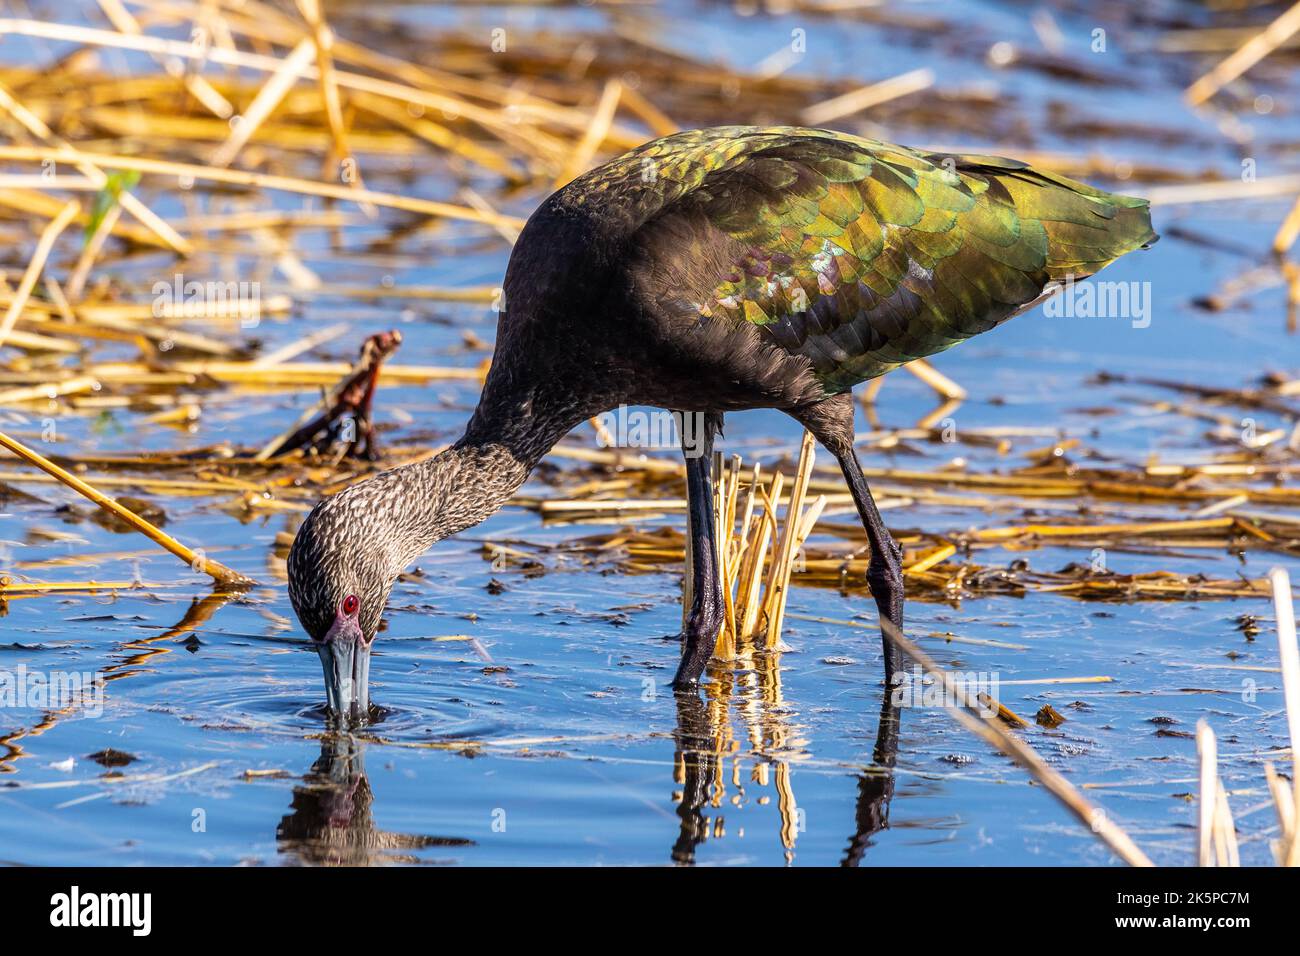 A White Faced Ibis (Plegadis chihi) poses for a photo at the Merced National Wildlife Refuge in the Central Valley of California USA Stock Photo